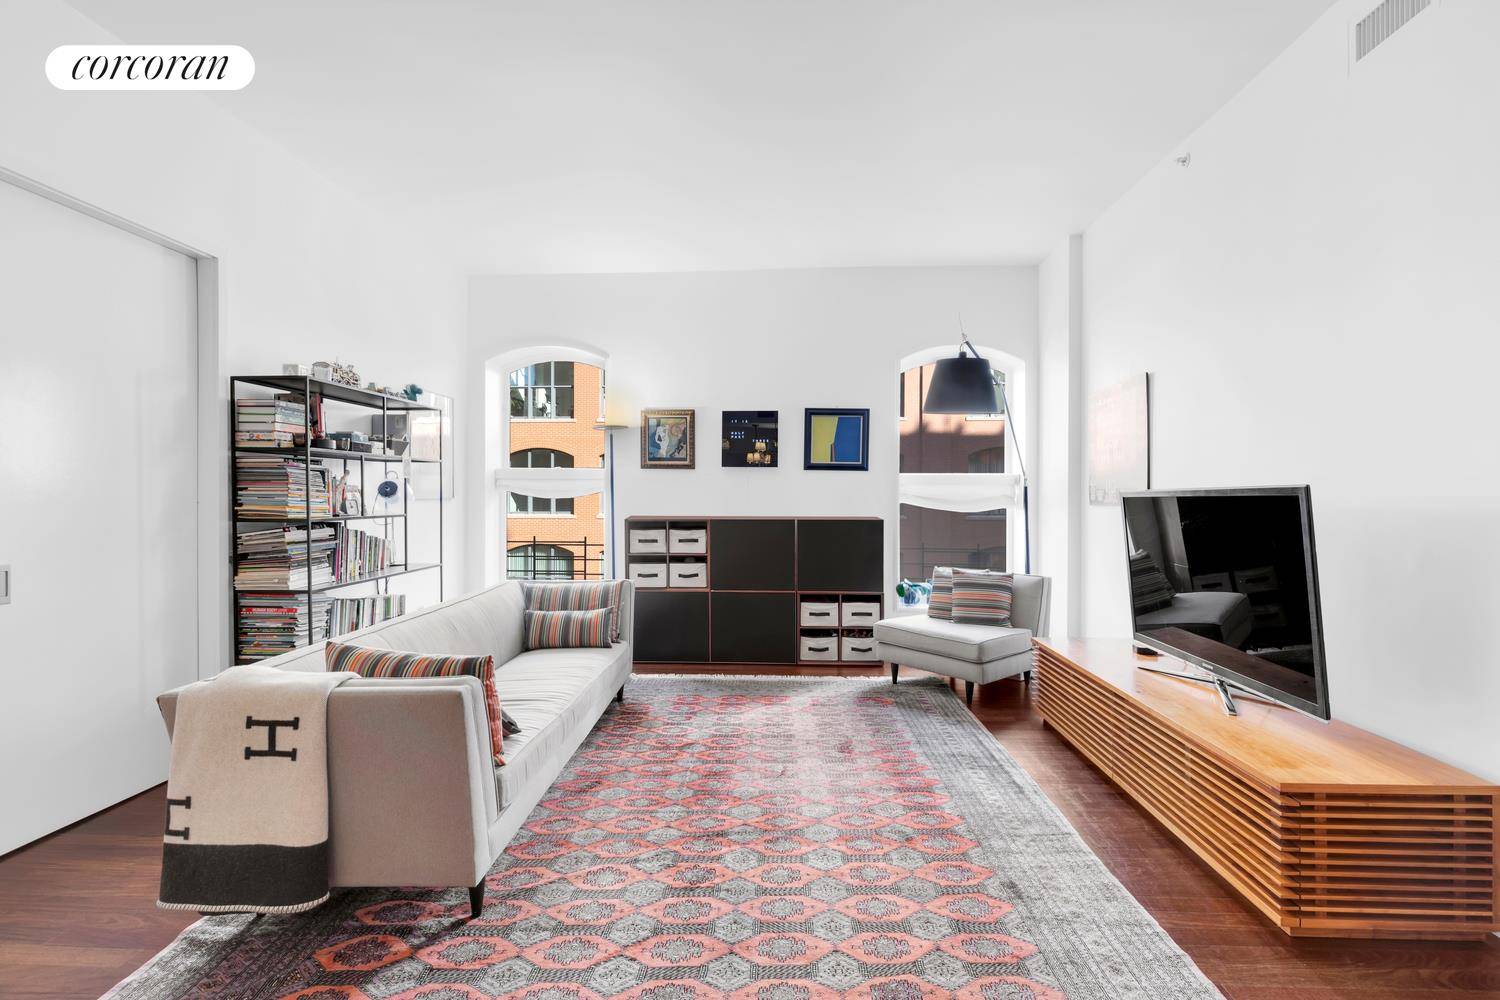 Modern luxury meets pre war charm in residence 4H, a renovated 3 bedroom, 3 bath sun filled loft in one of North TriBeCa's most coveted full service condominiums.